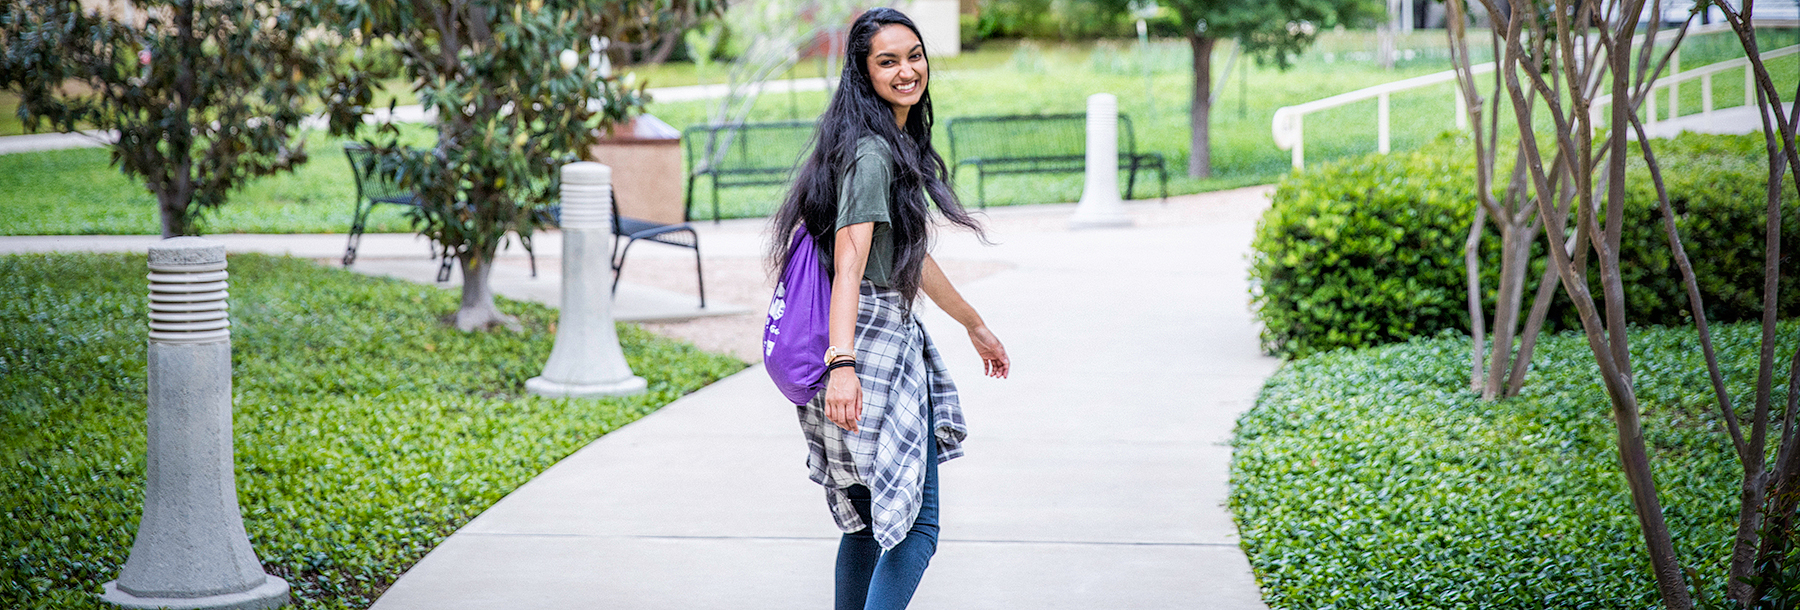 Section Image: Girl on campus smiling 